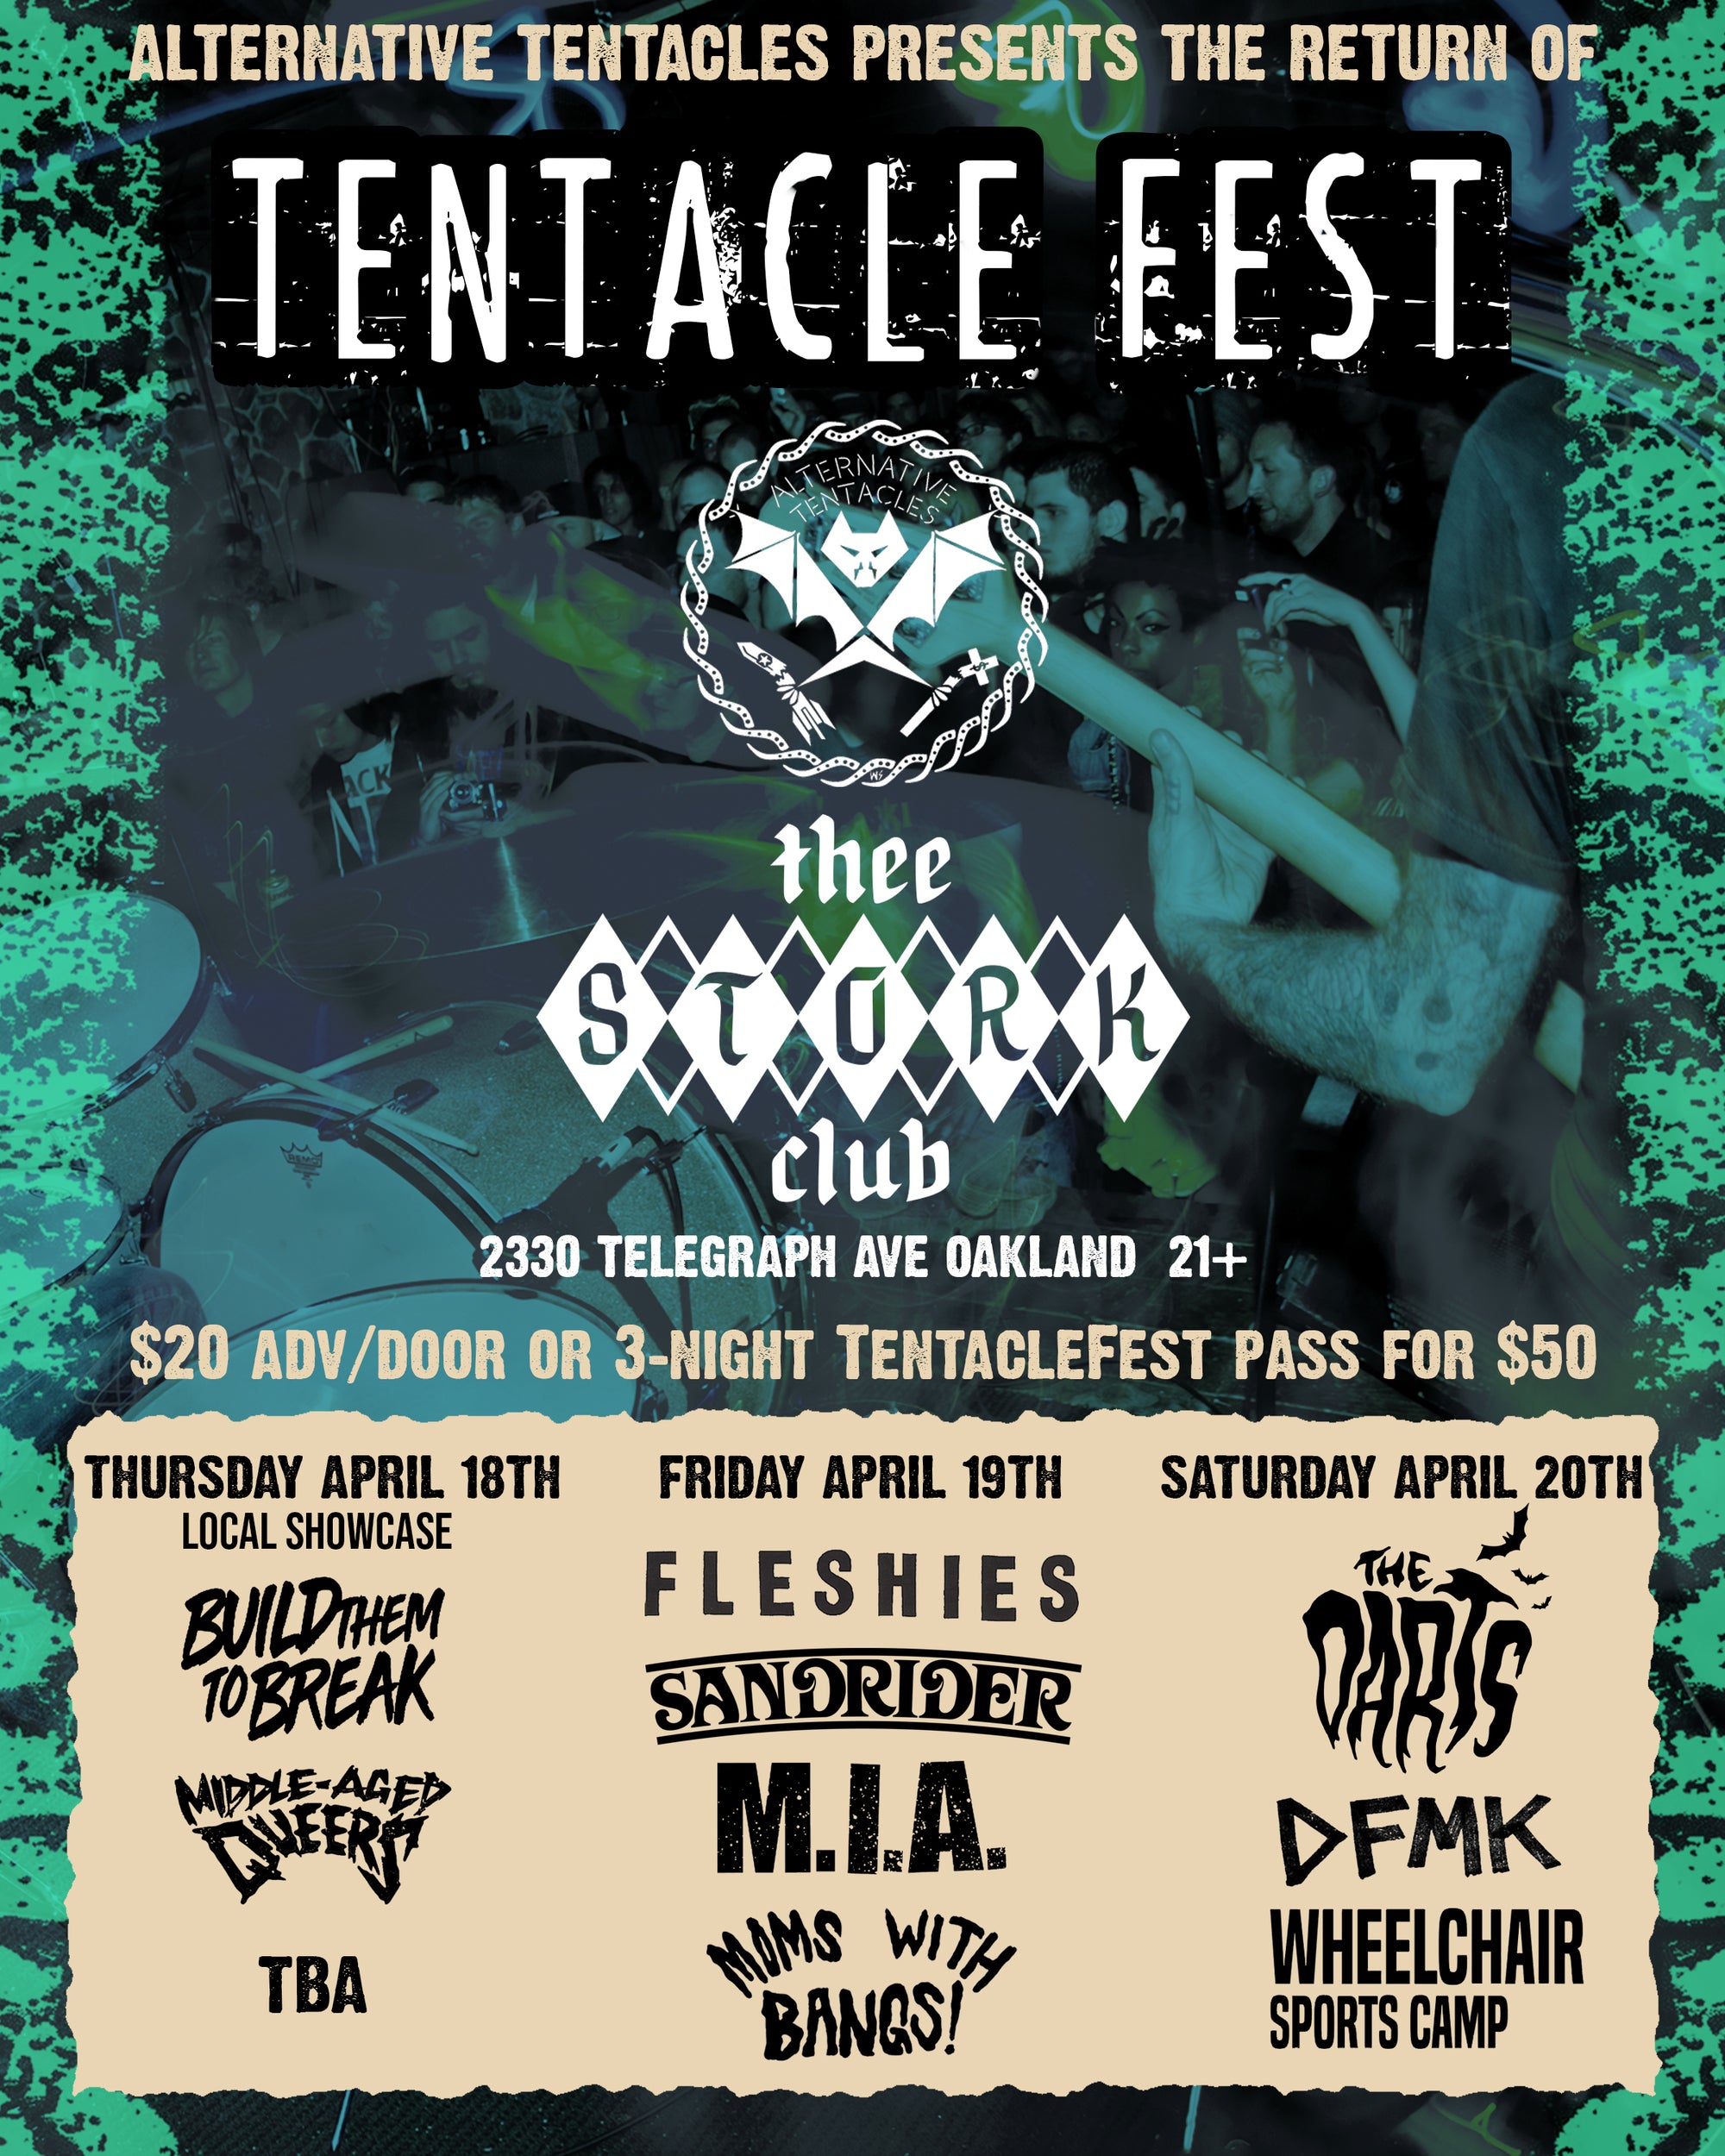 ALTERNATIVE TENTACLES IS PROUD TO PRESENT TENTACLE FEST 2024